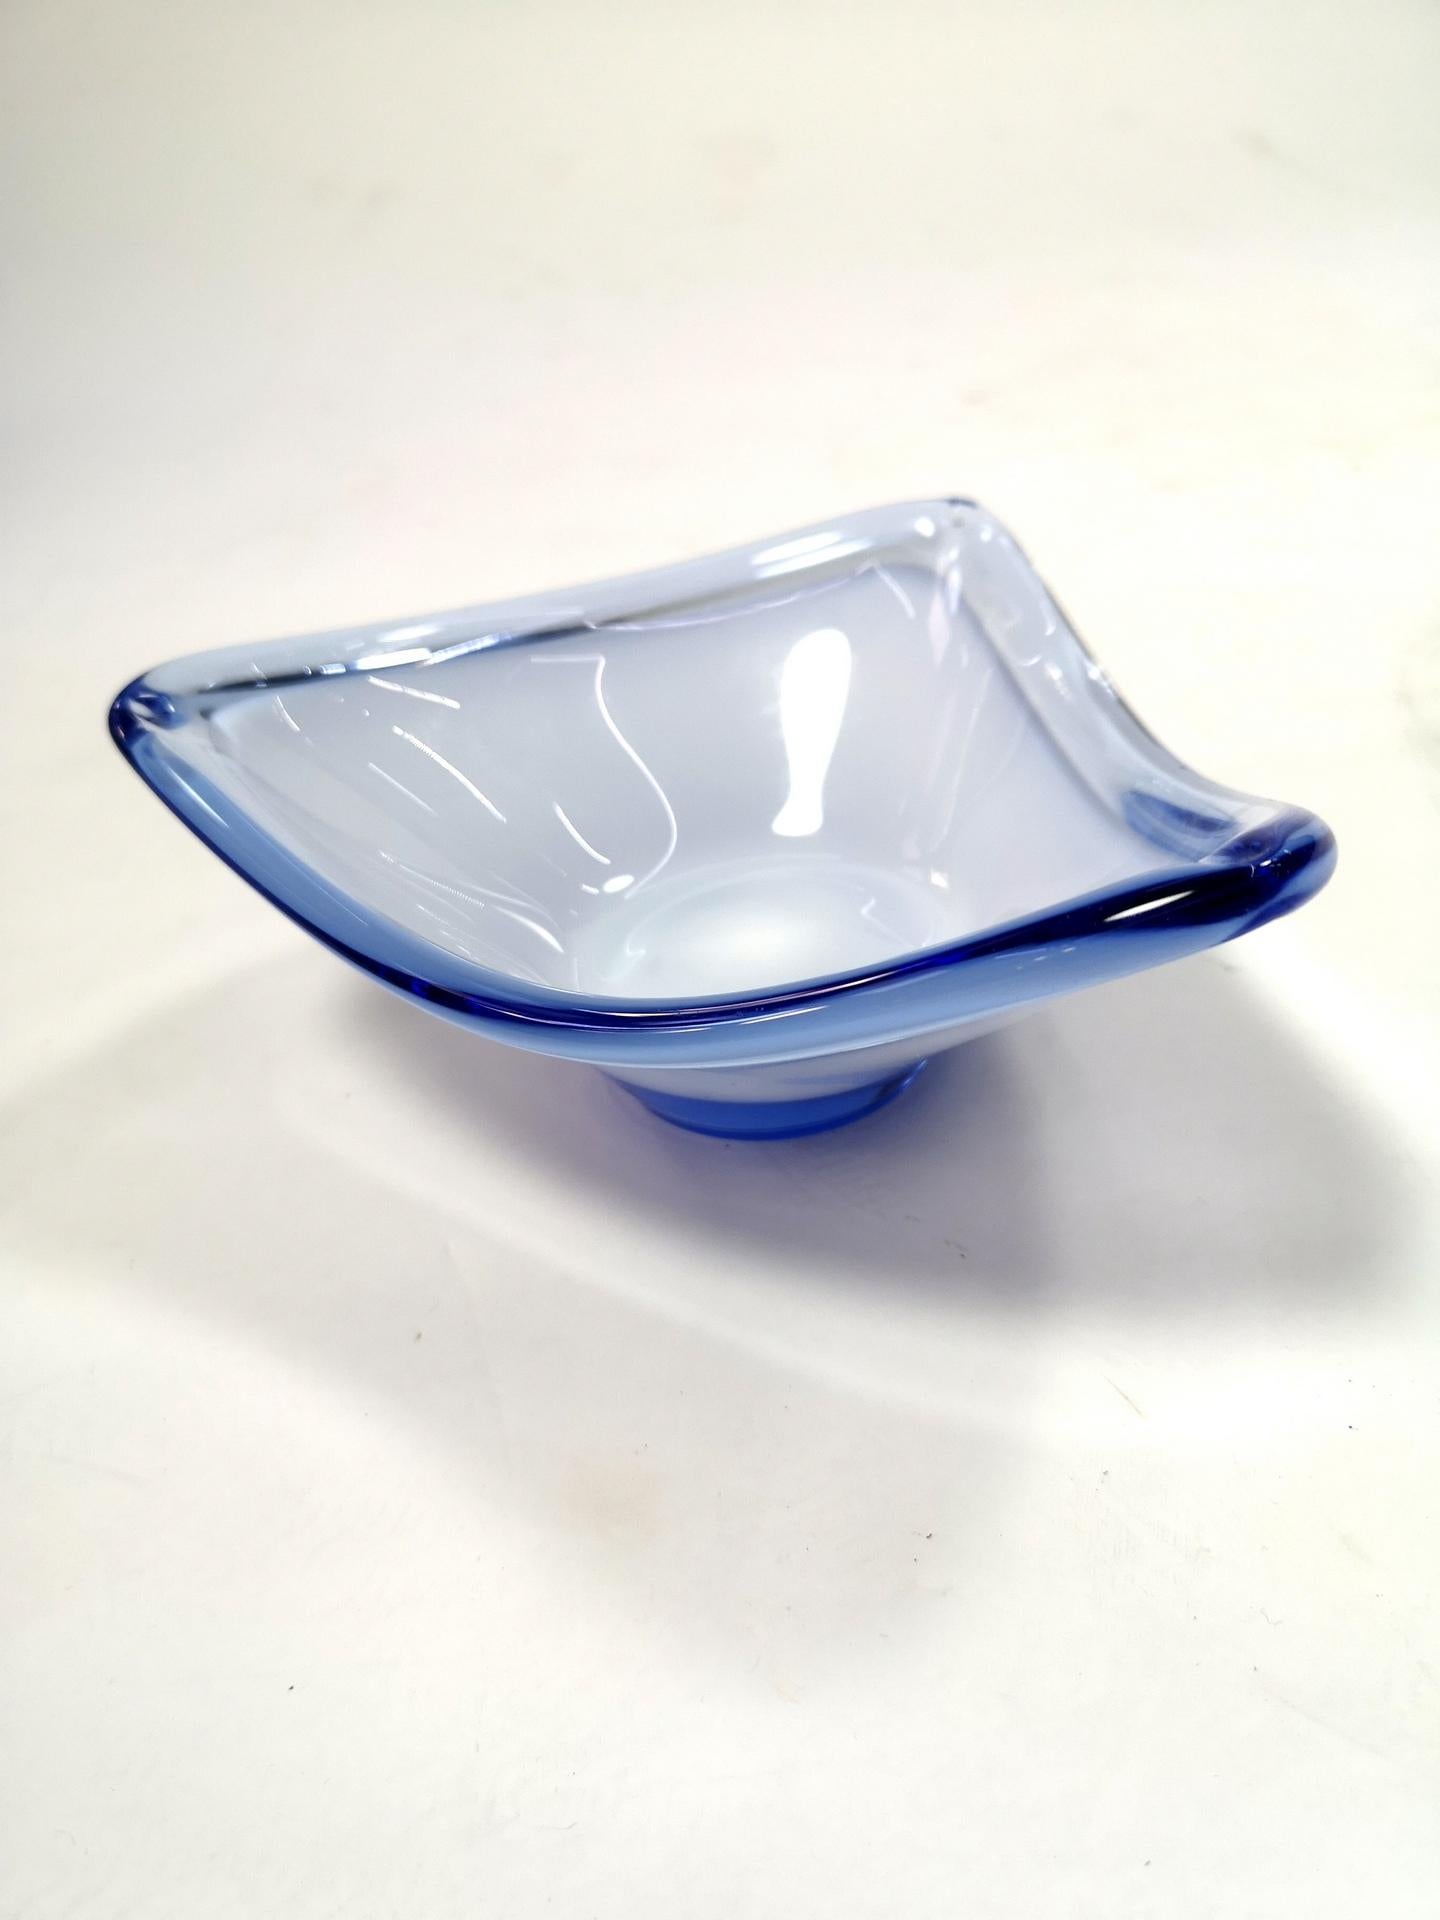 Signed, Hand Made Coquille Glass Vide-Poch, Flygsfors, Sweden, 1958 For Sale 2